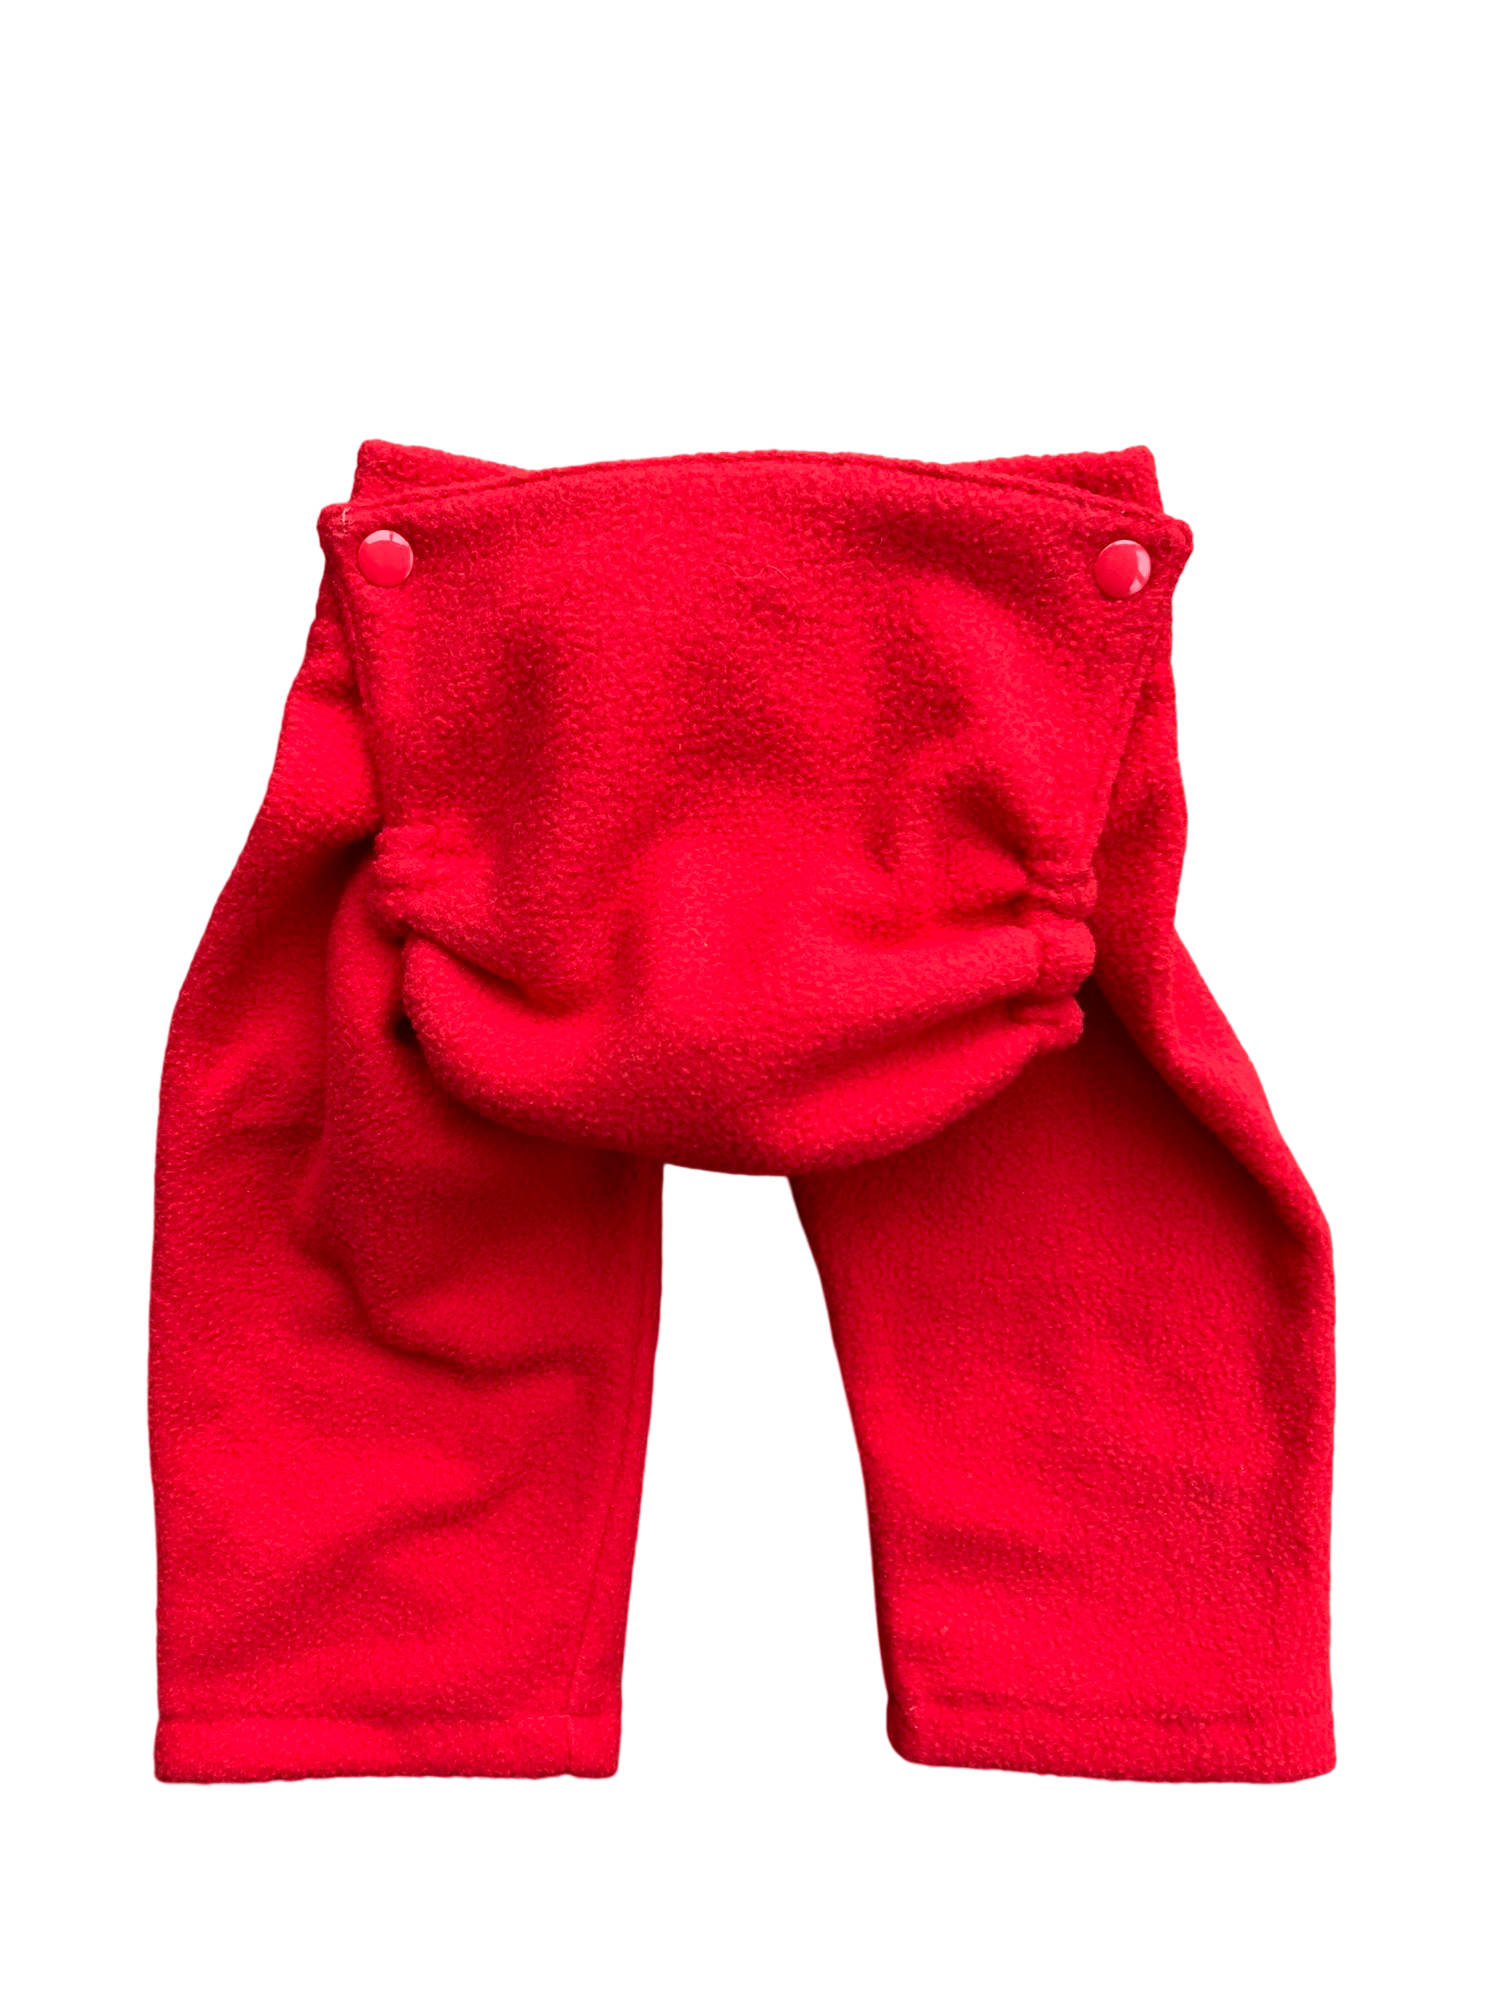 Candy Apple Red Chappy-Nappy Pants